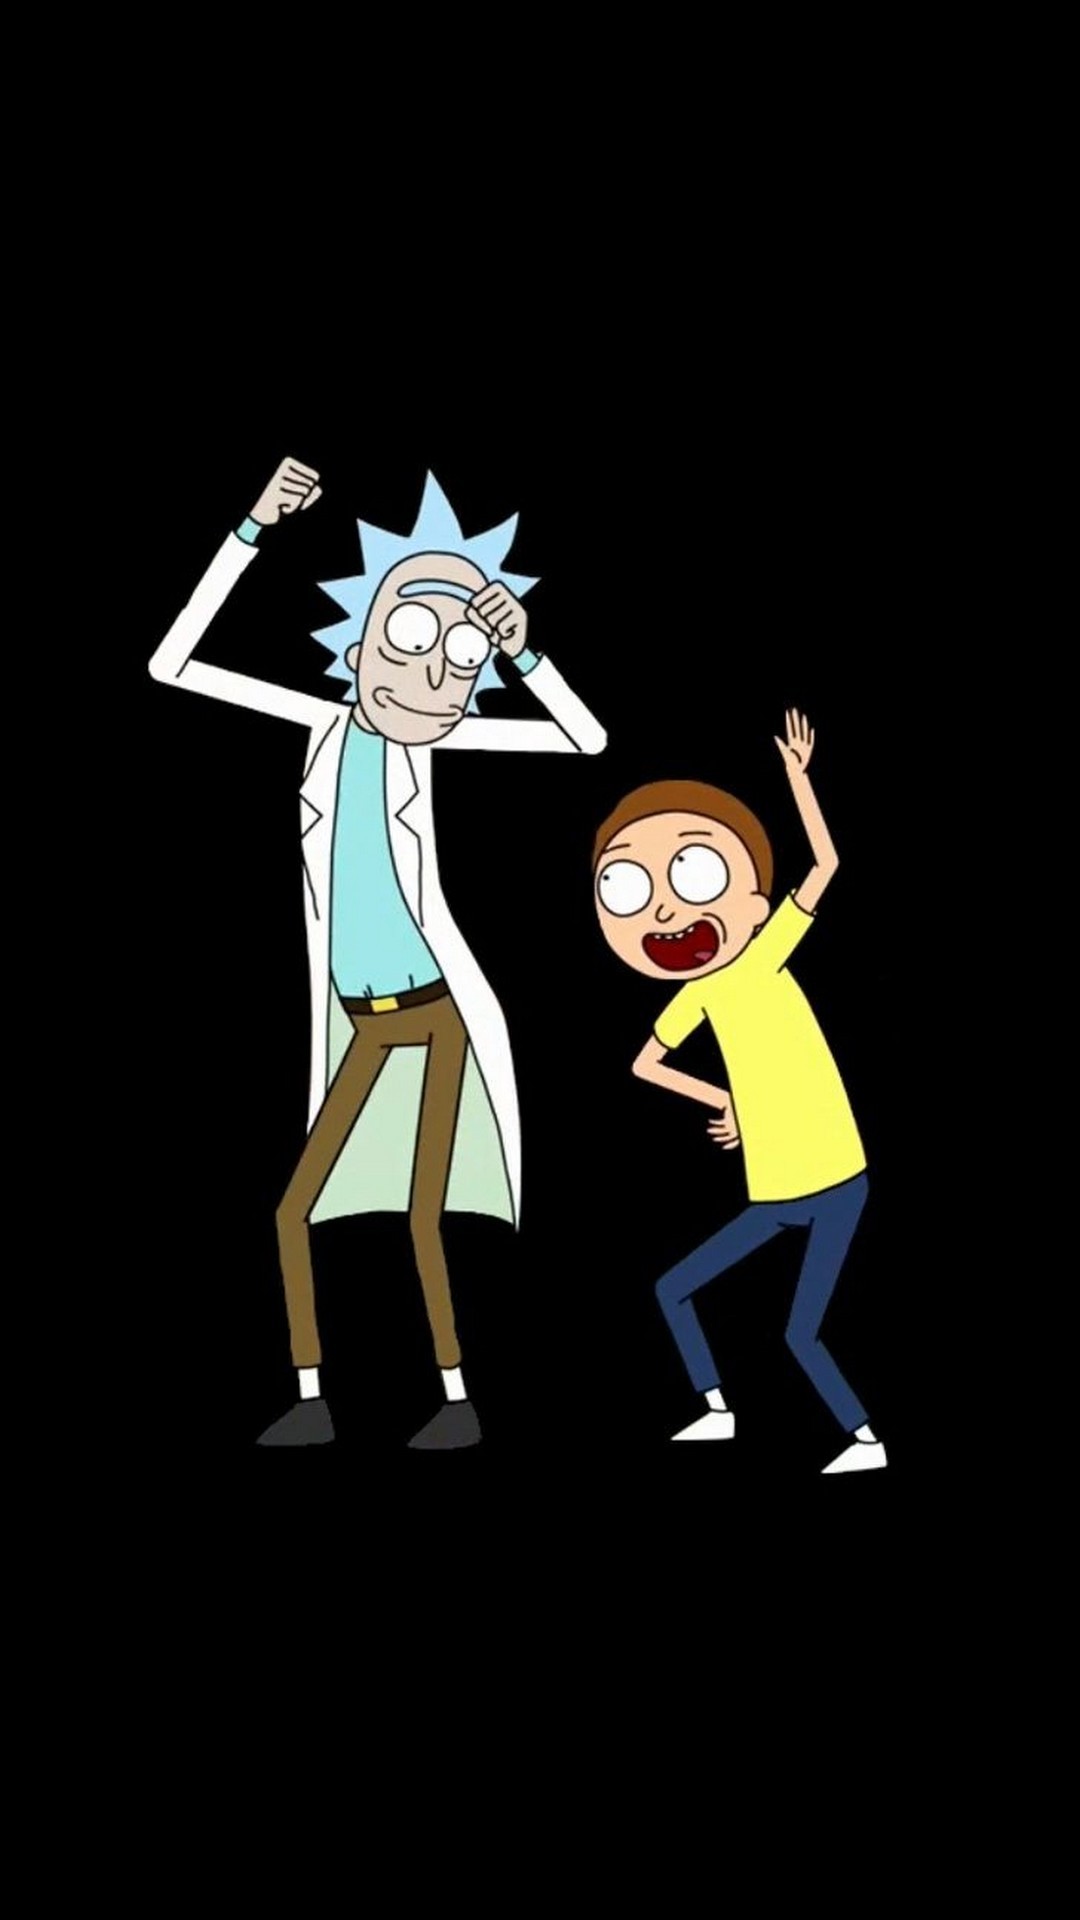 Wallpaper Rick and Morty iPhone | 2020